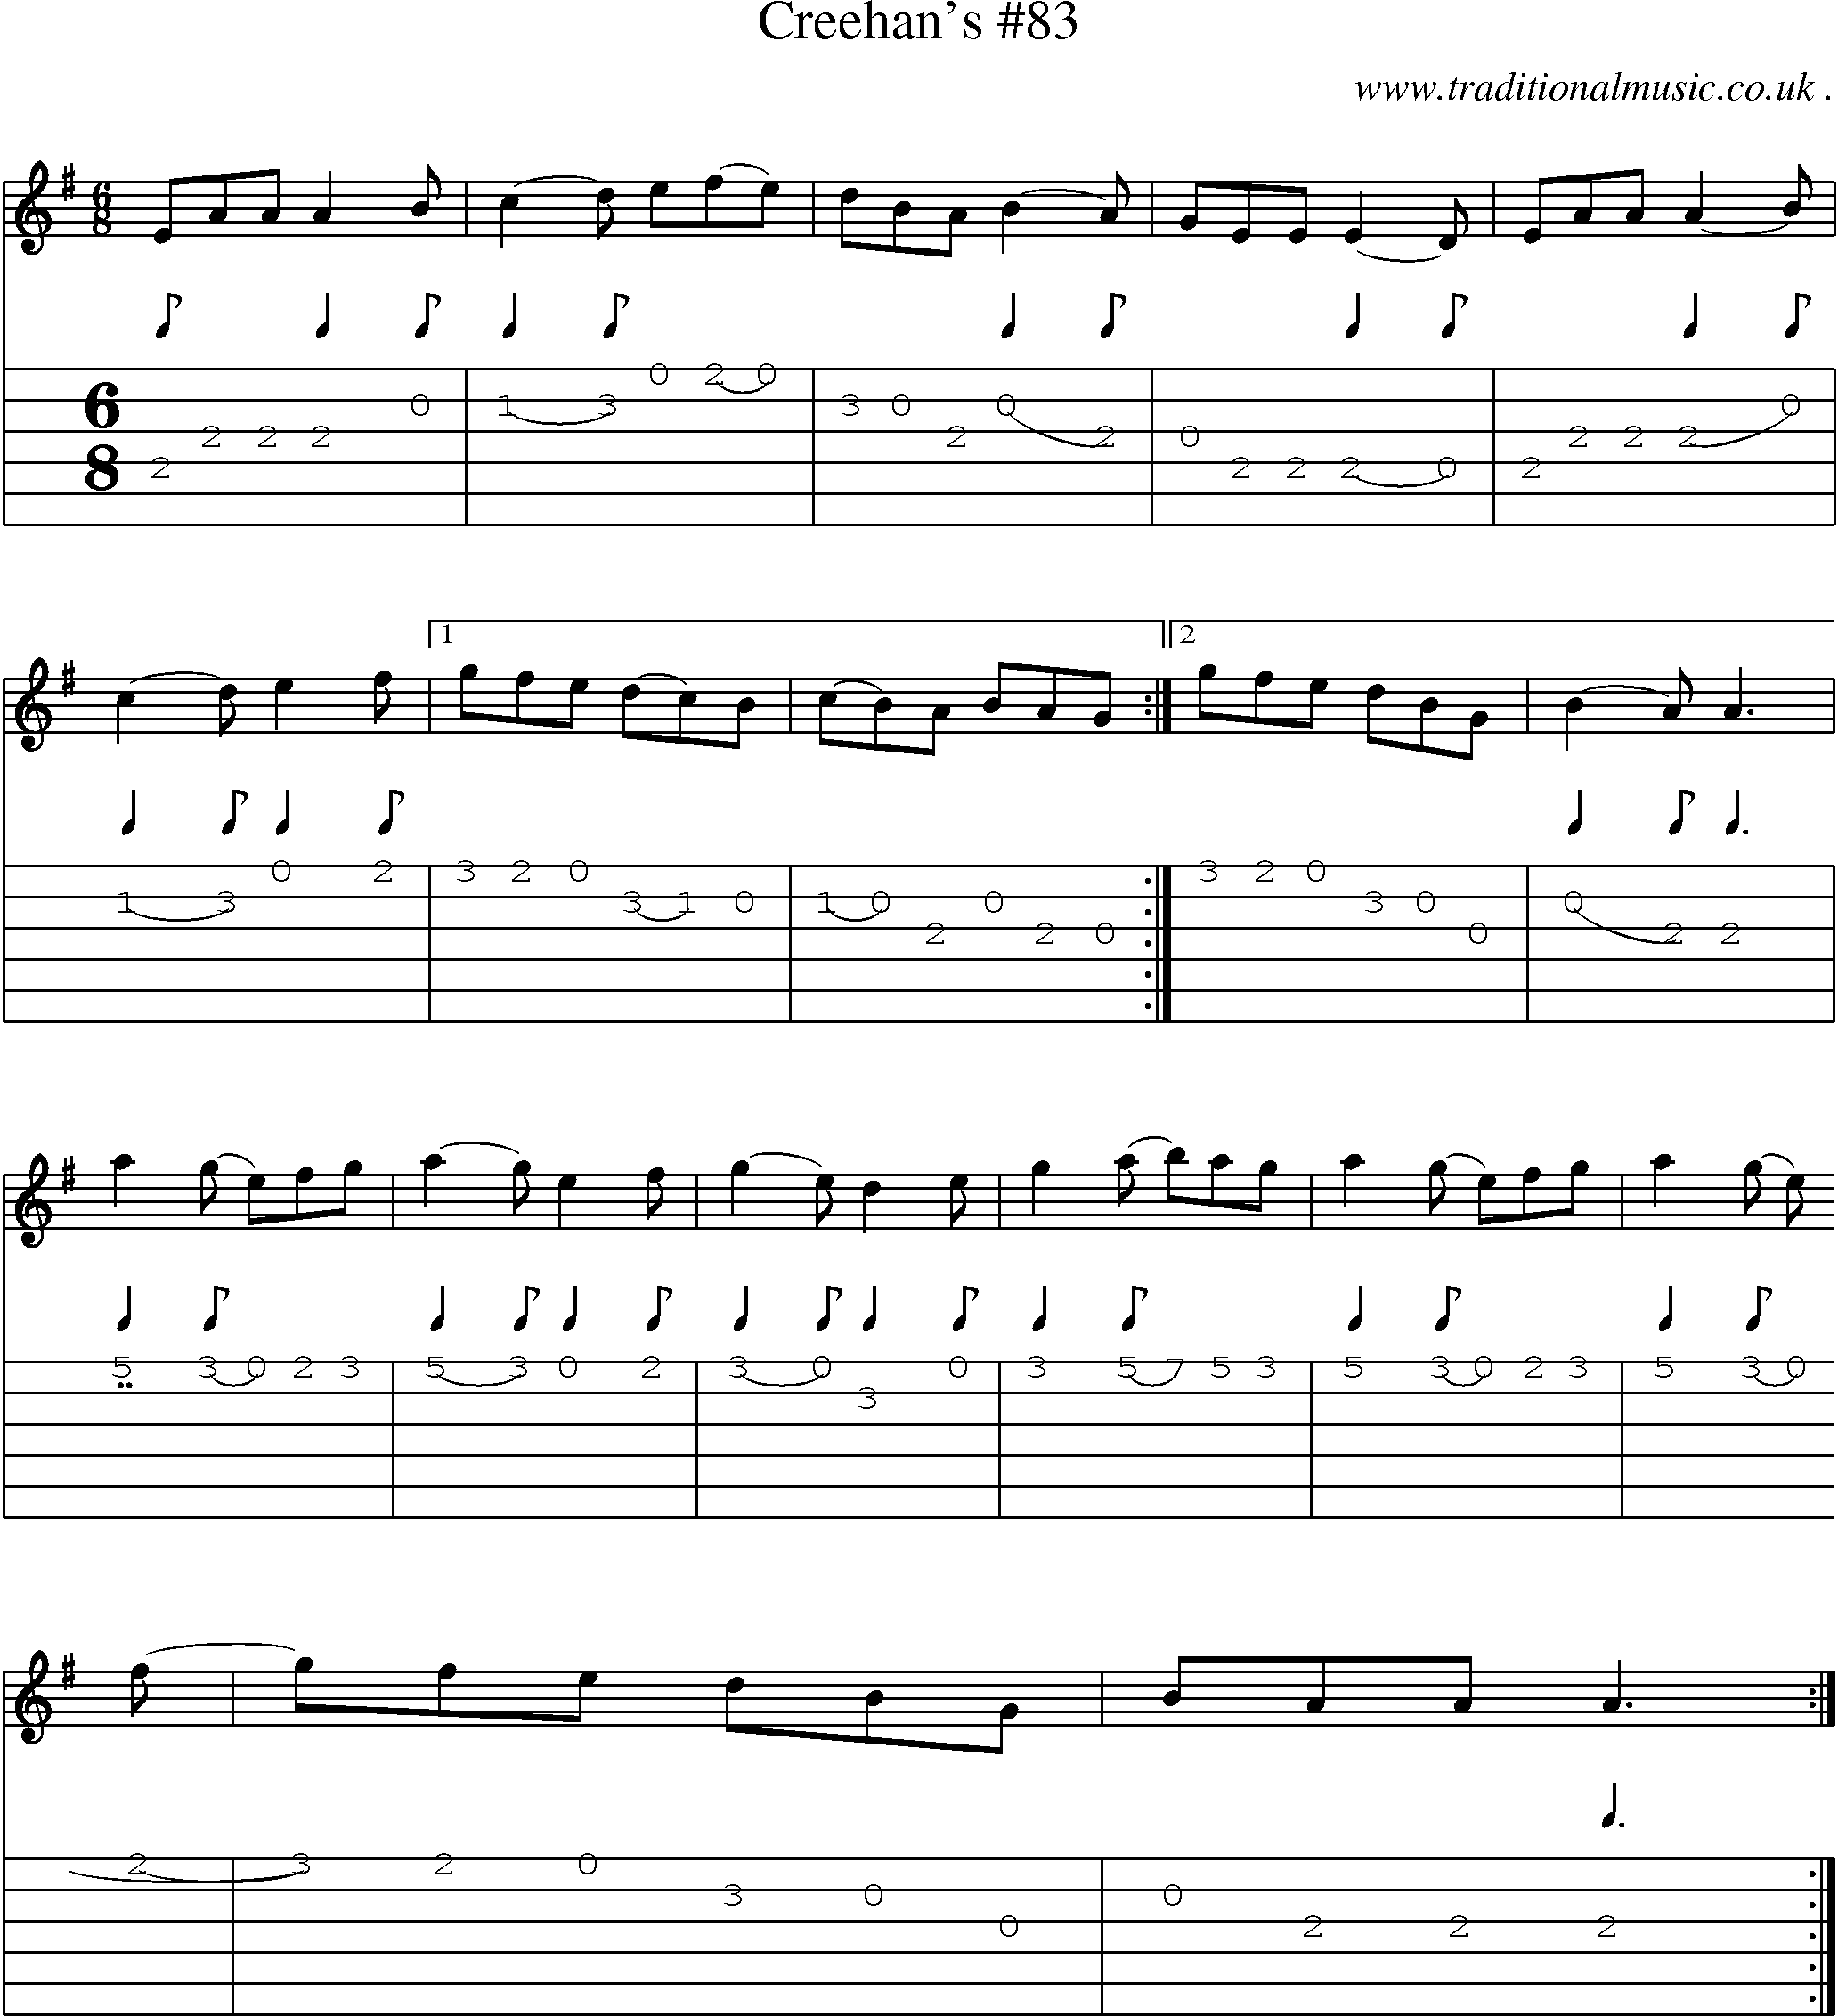 Sheet-Music and Guitar Tabs for Creehans 83